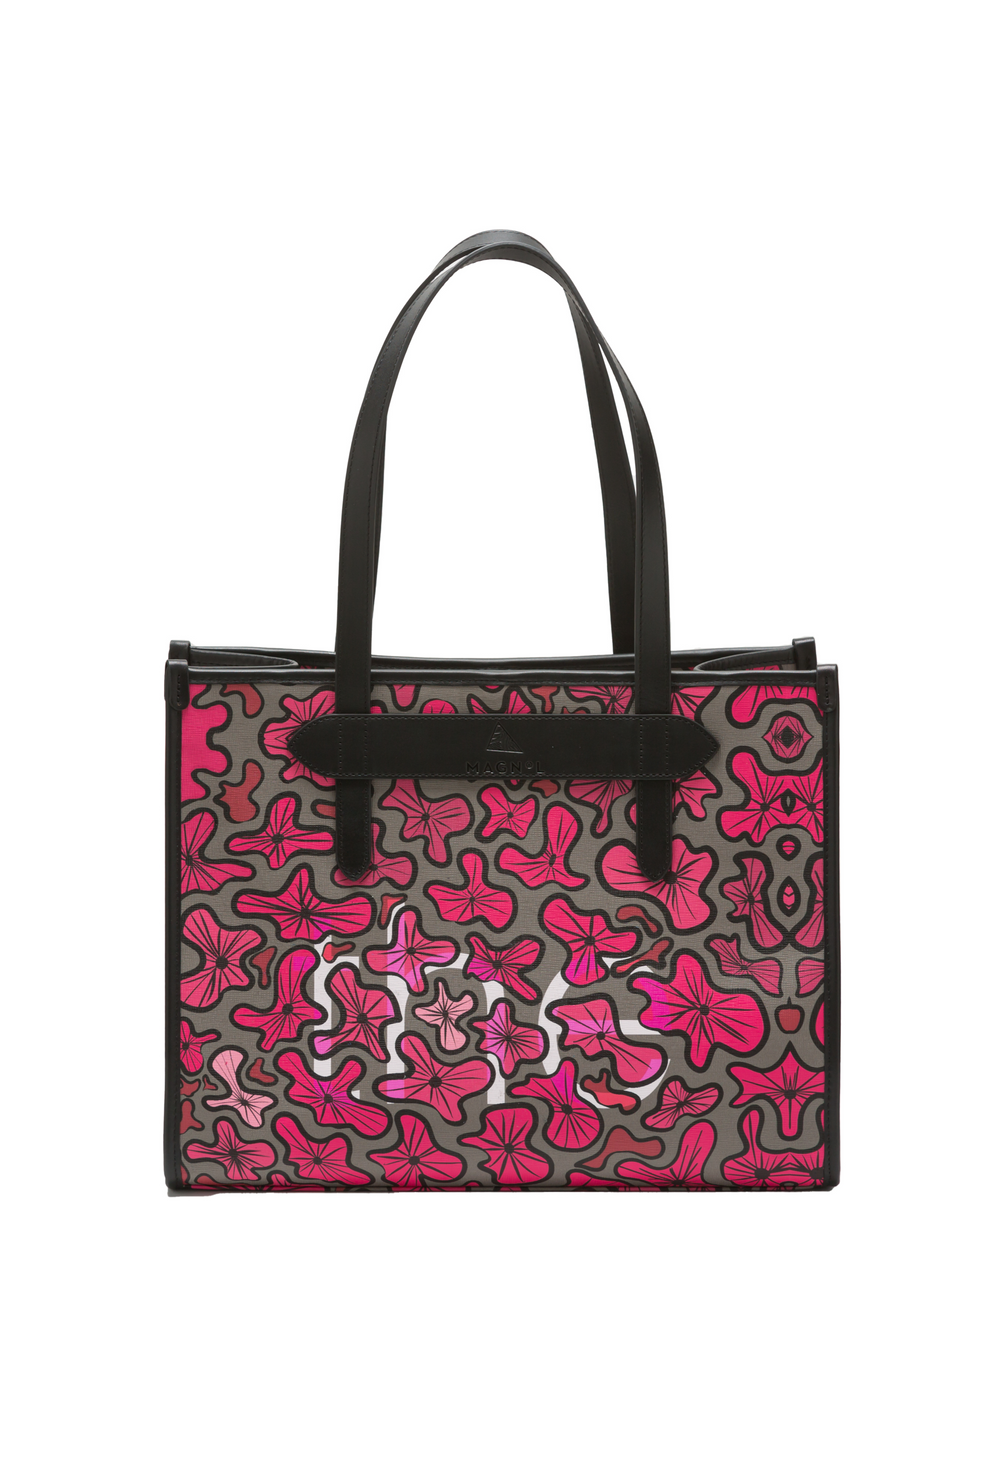 BOOST THE CELLS - TOTE BAG - PINK BLACK